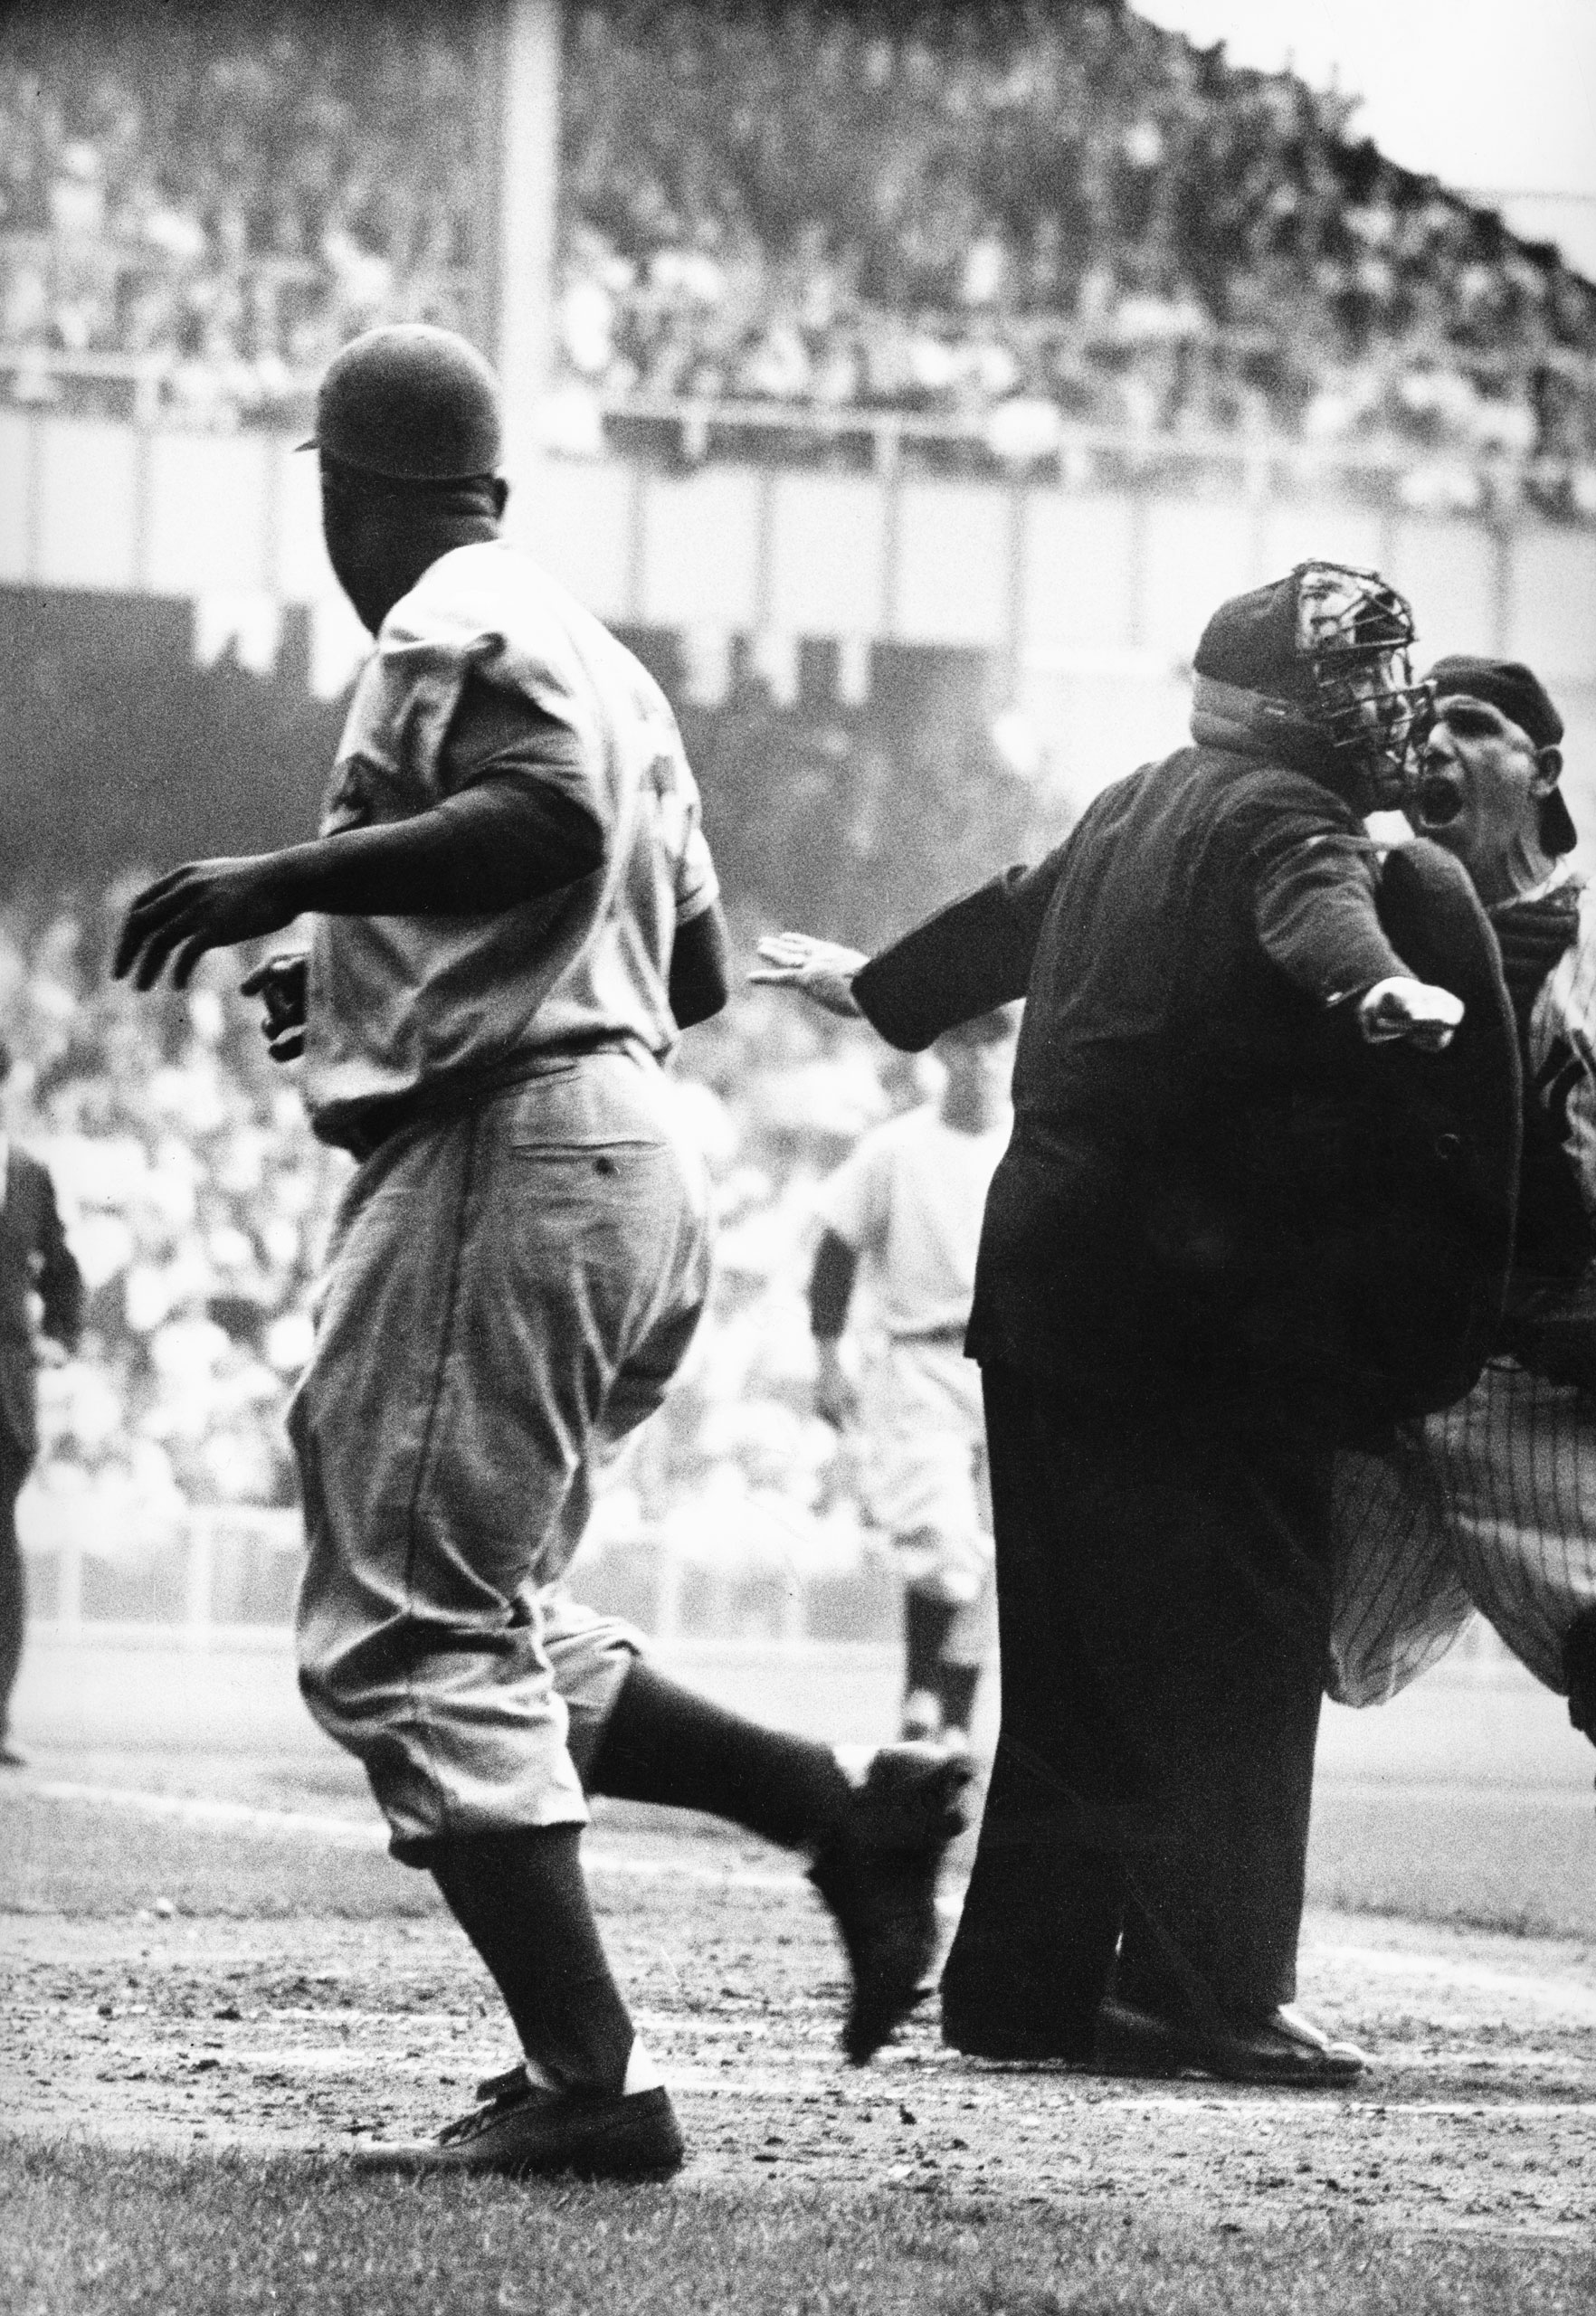 Yogi Berra takes issue with the umpire's "safe" call after Jackie Robinson's electrifying steal of home in Game 1 of the 1955 World Series.